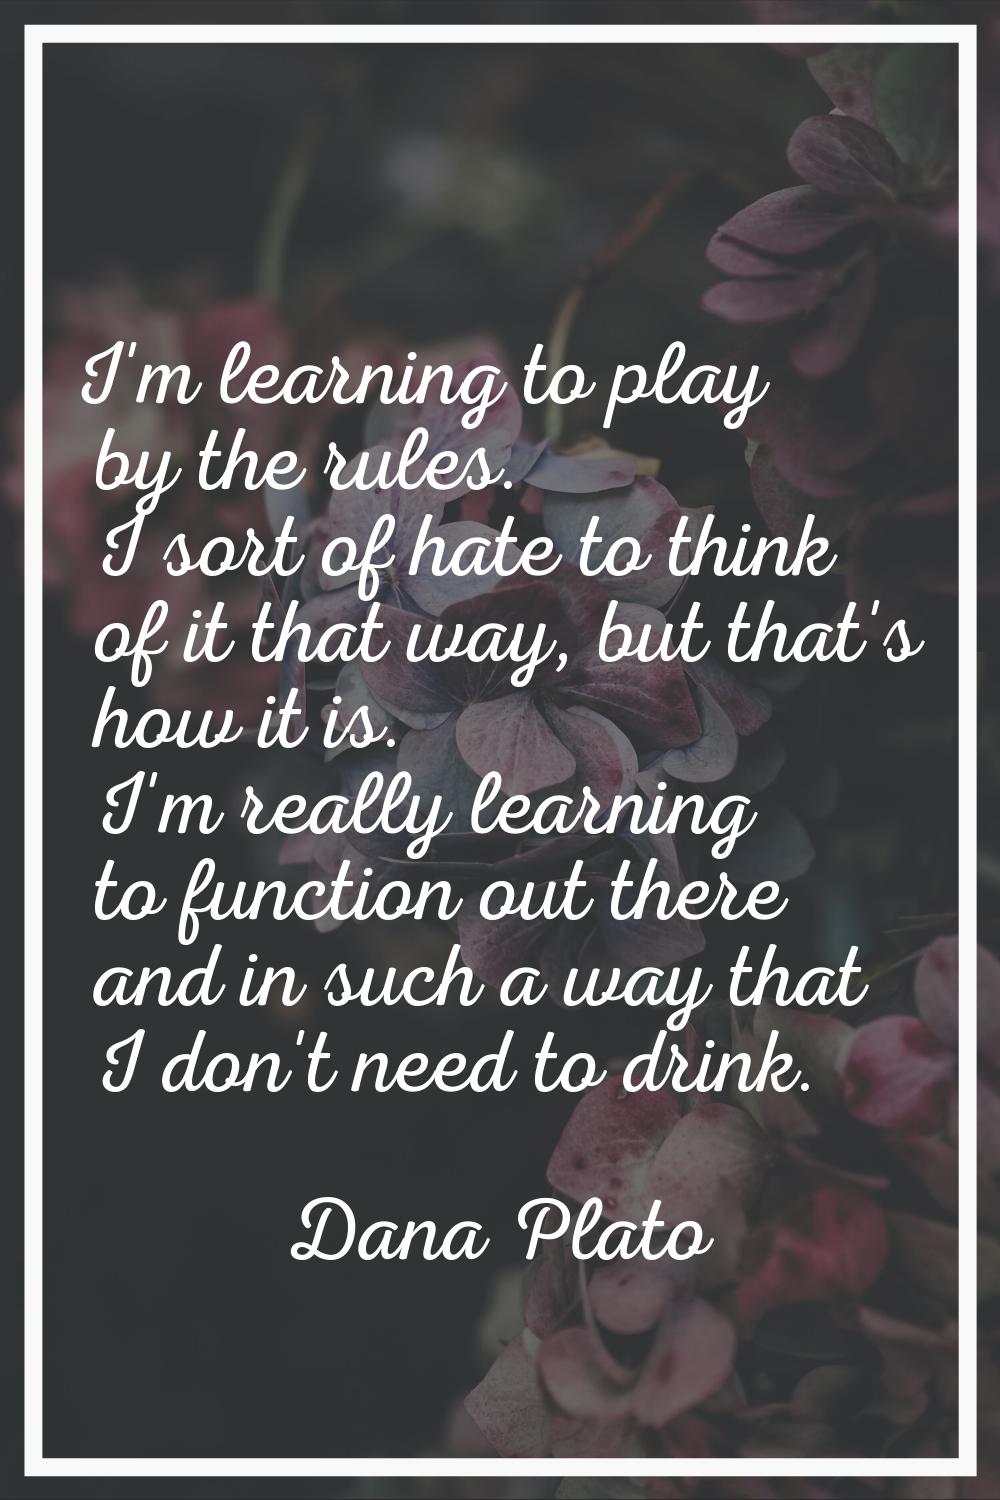 I'm learning to play by the rules. I sort of hate to think of it that way, but that's how it is. I'